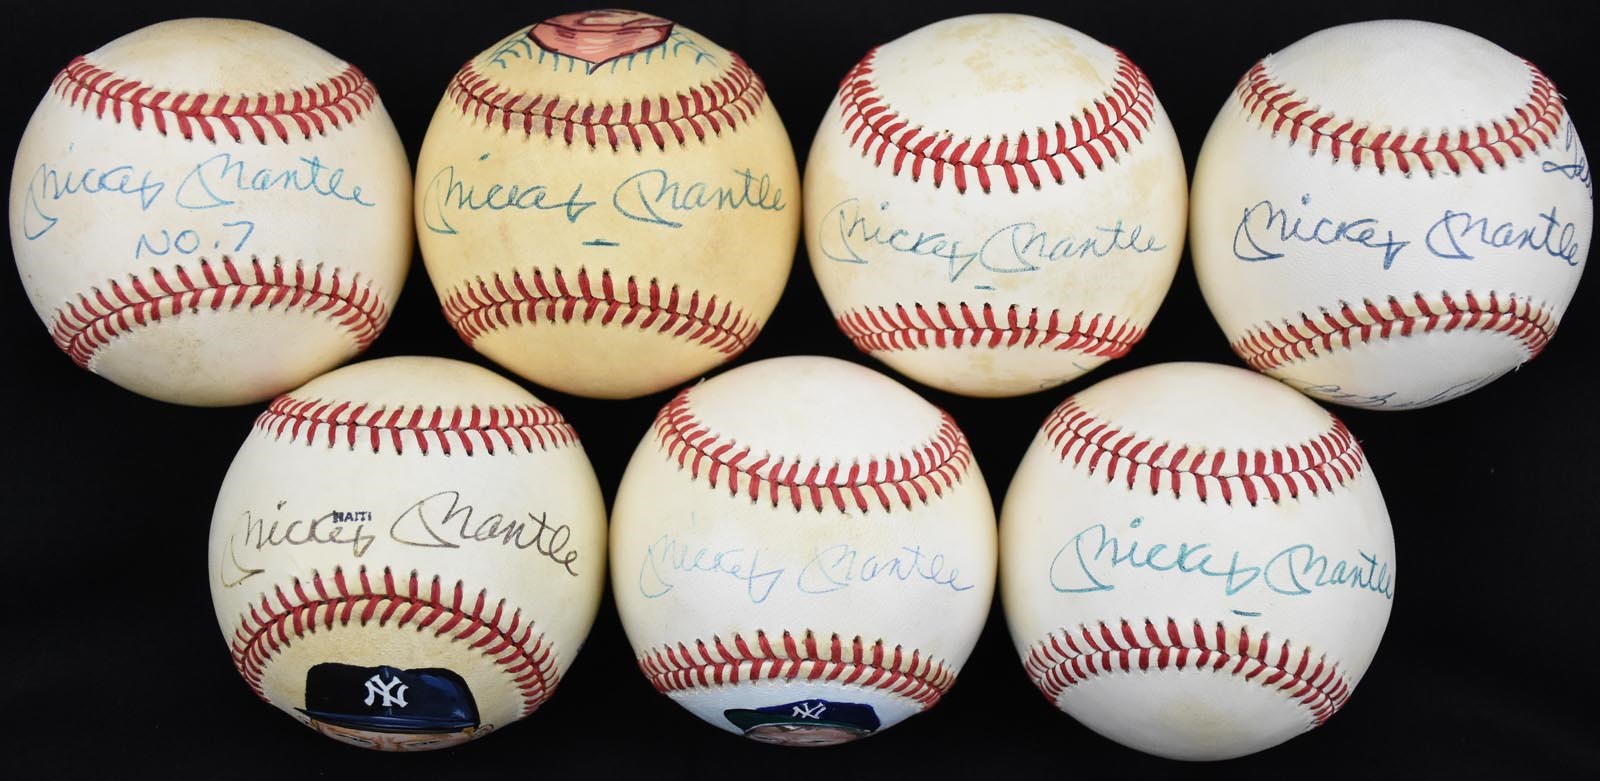 Mantle and Maris - "7" Mickey Mantle Signed Baseballs w/Three Painted (PSA)